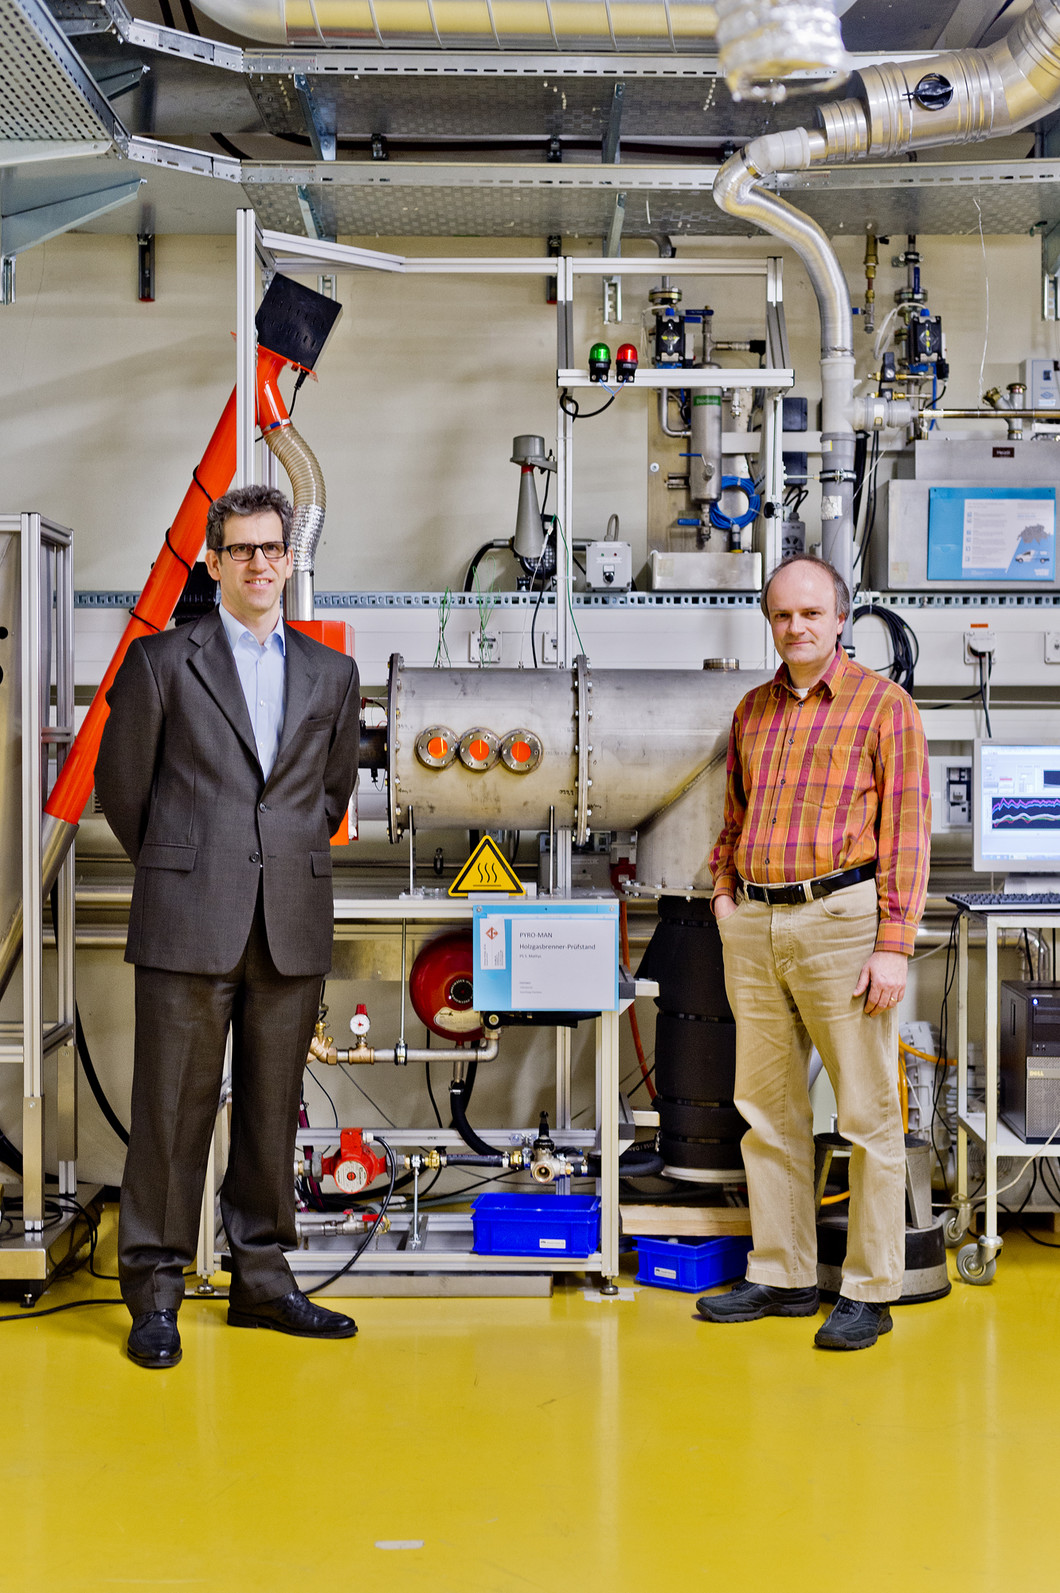 Pictured in front of the new wood gas burner test rig in the laboratory building of the School of Engineering of the University of Applied Sciences FHNW in Brugg-Windisch are (from left) Prof. Dr. Timothy Griffin, Head of the Institute of Biomass and Resource Efficiency (IBRE), and Prof. Dr. Frédéric Vogel, Deputy Head of the IBRE and Head of the Catalytic Process Engineering Group at the PSI. (picture: Emanuel Freudiger / AZ Media)